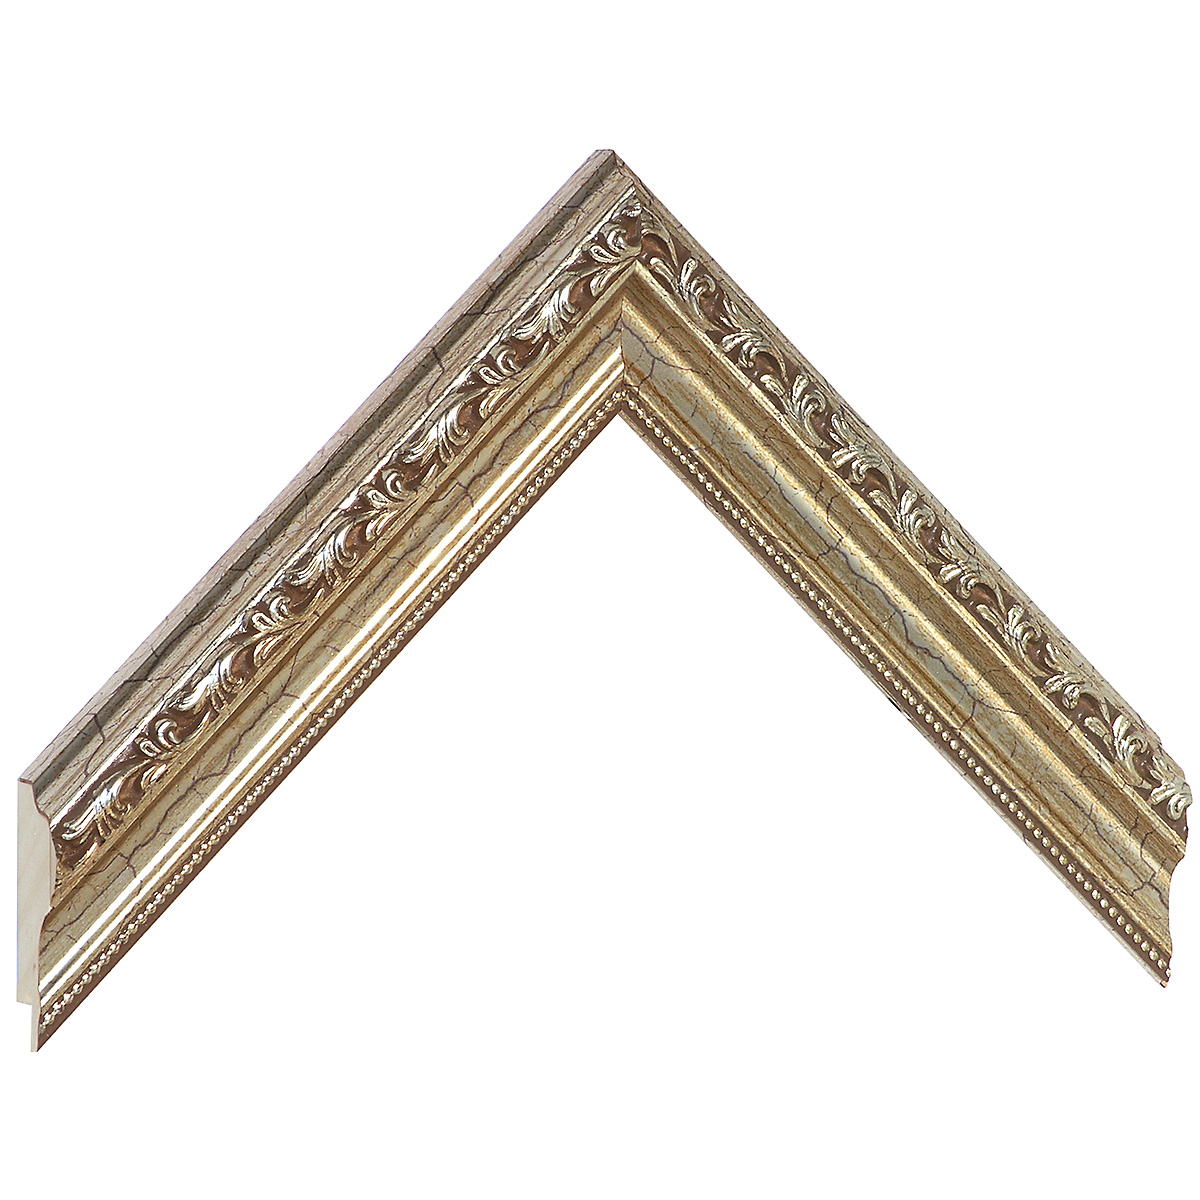 Moulding finger-jointed pine width 32mm - bronze, relief decorations - Sample